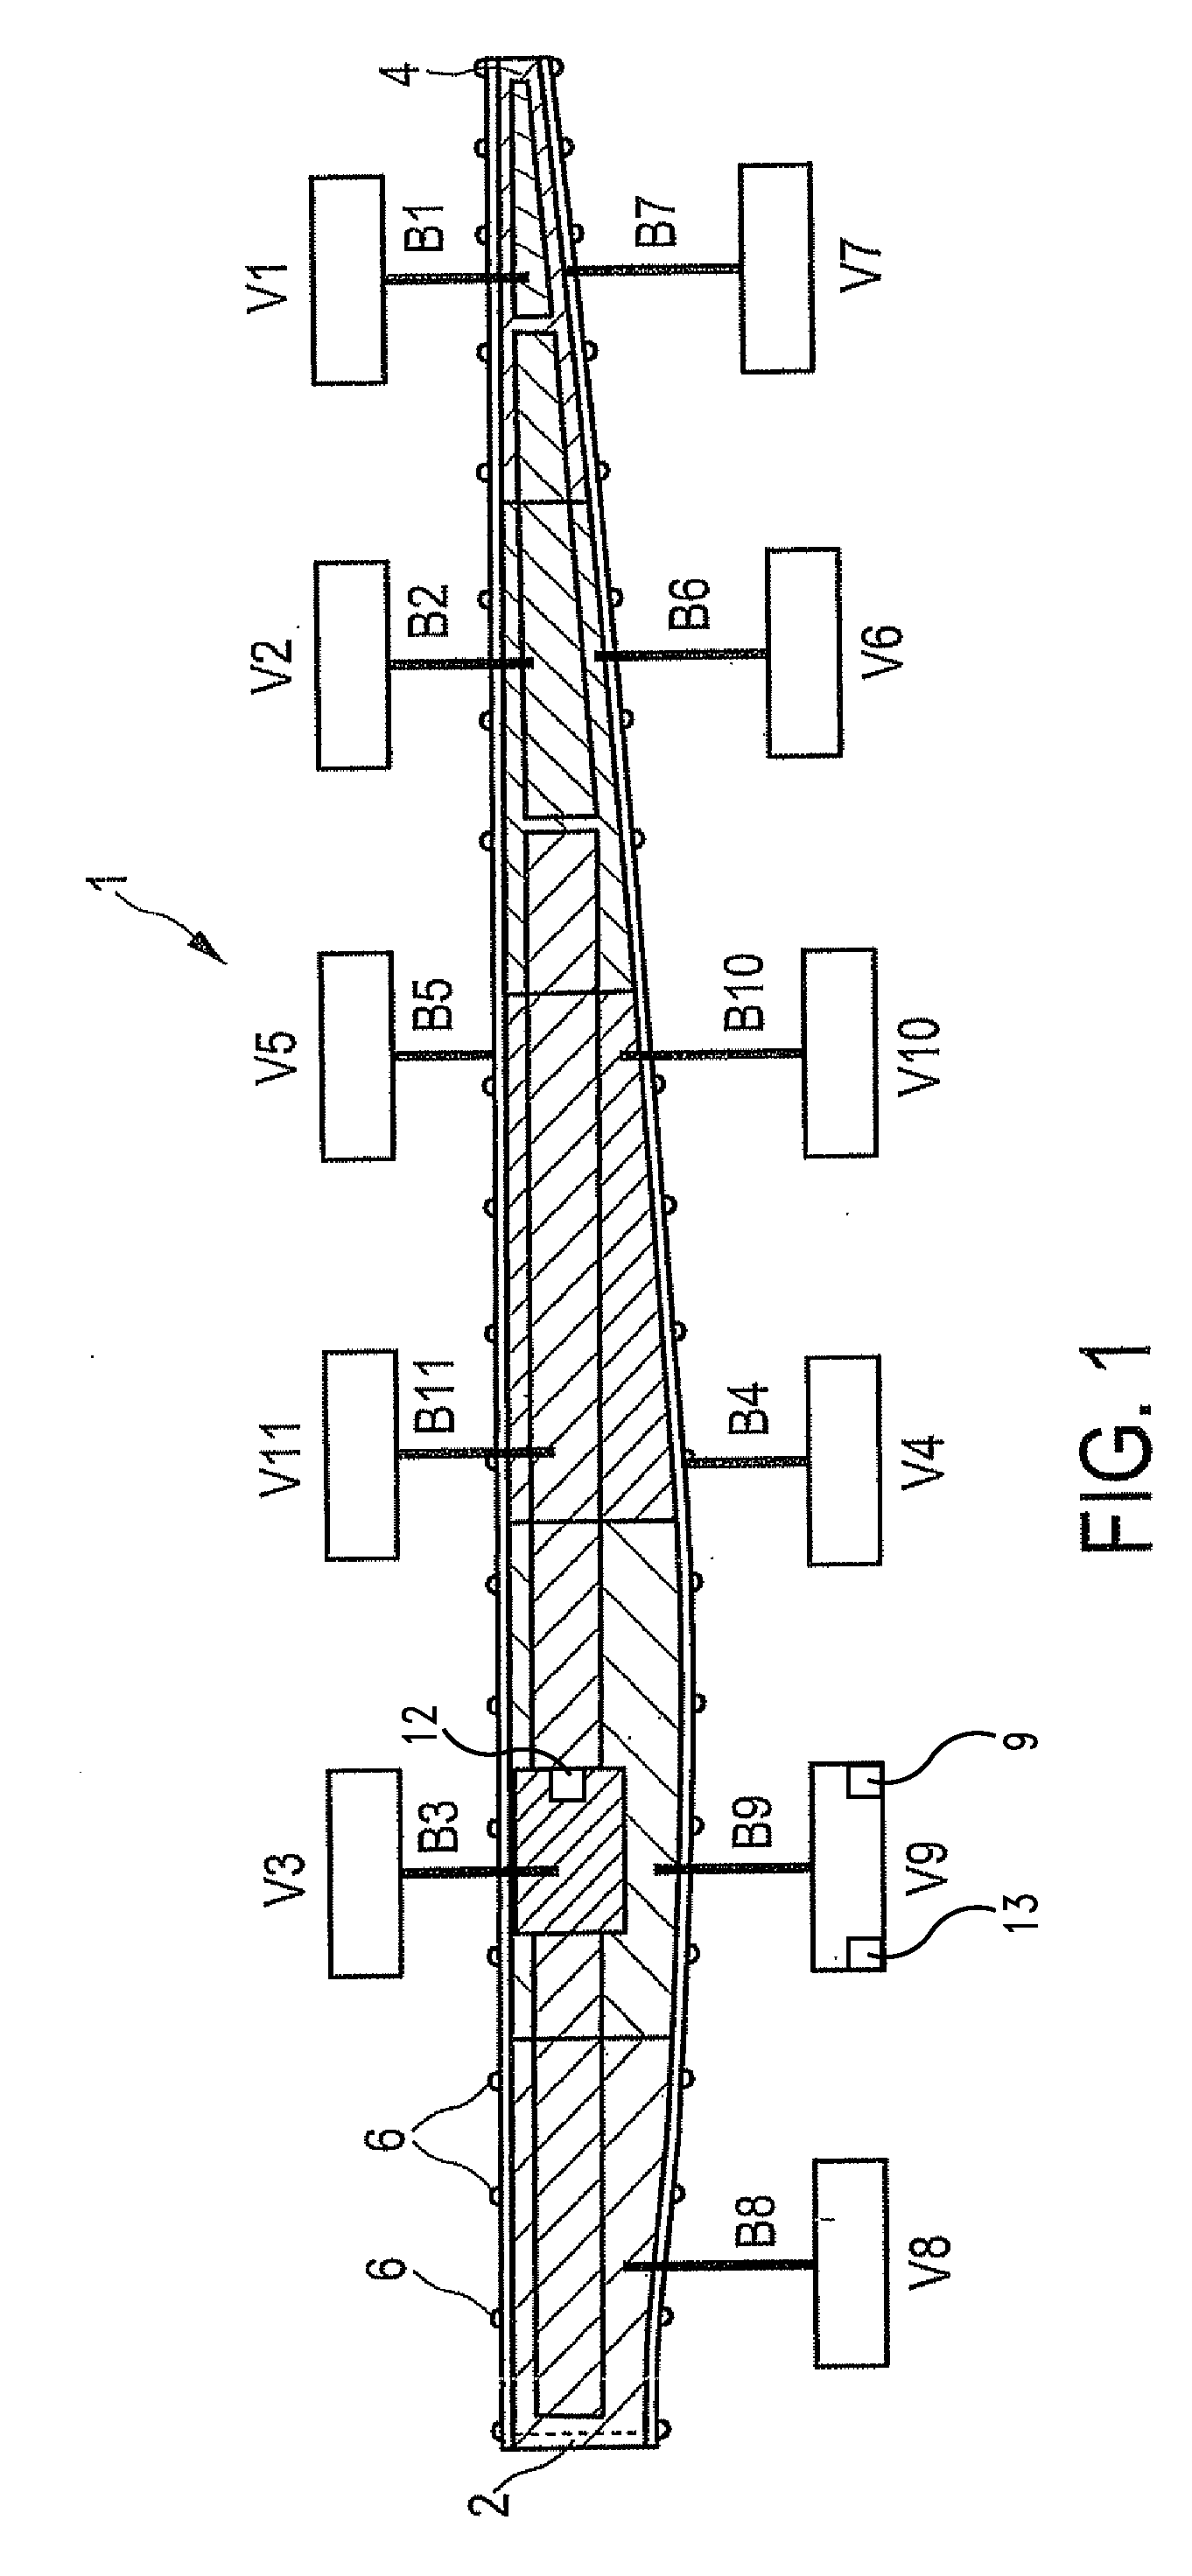 Rotor blade form for producing a rotor blade of a wind power plant